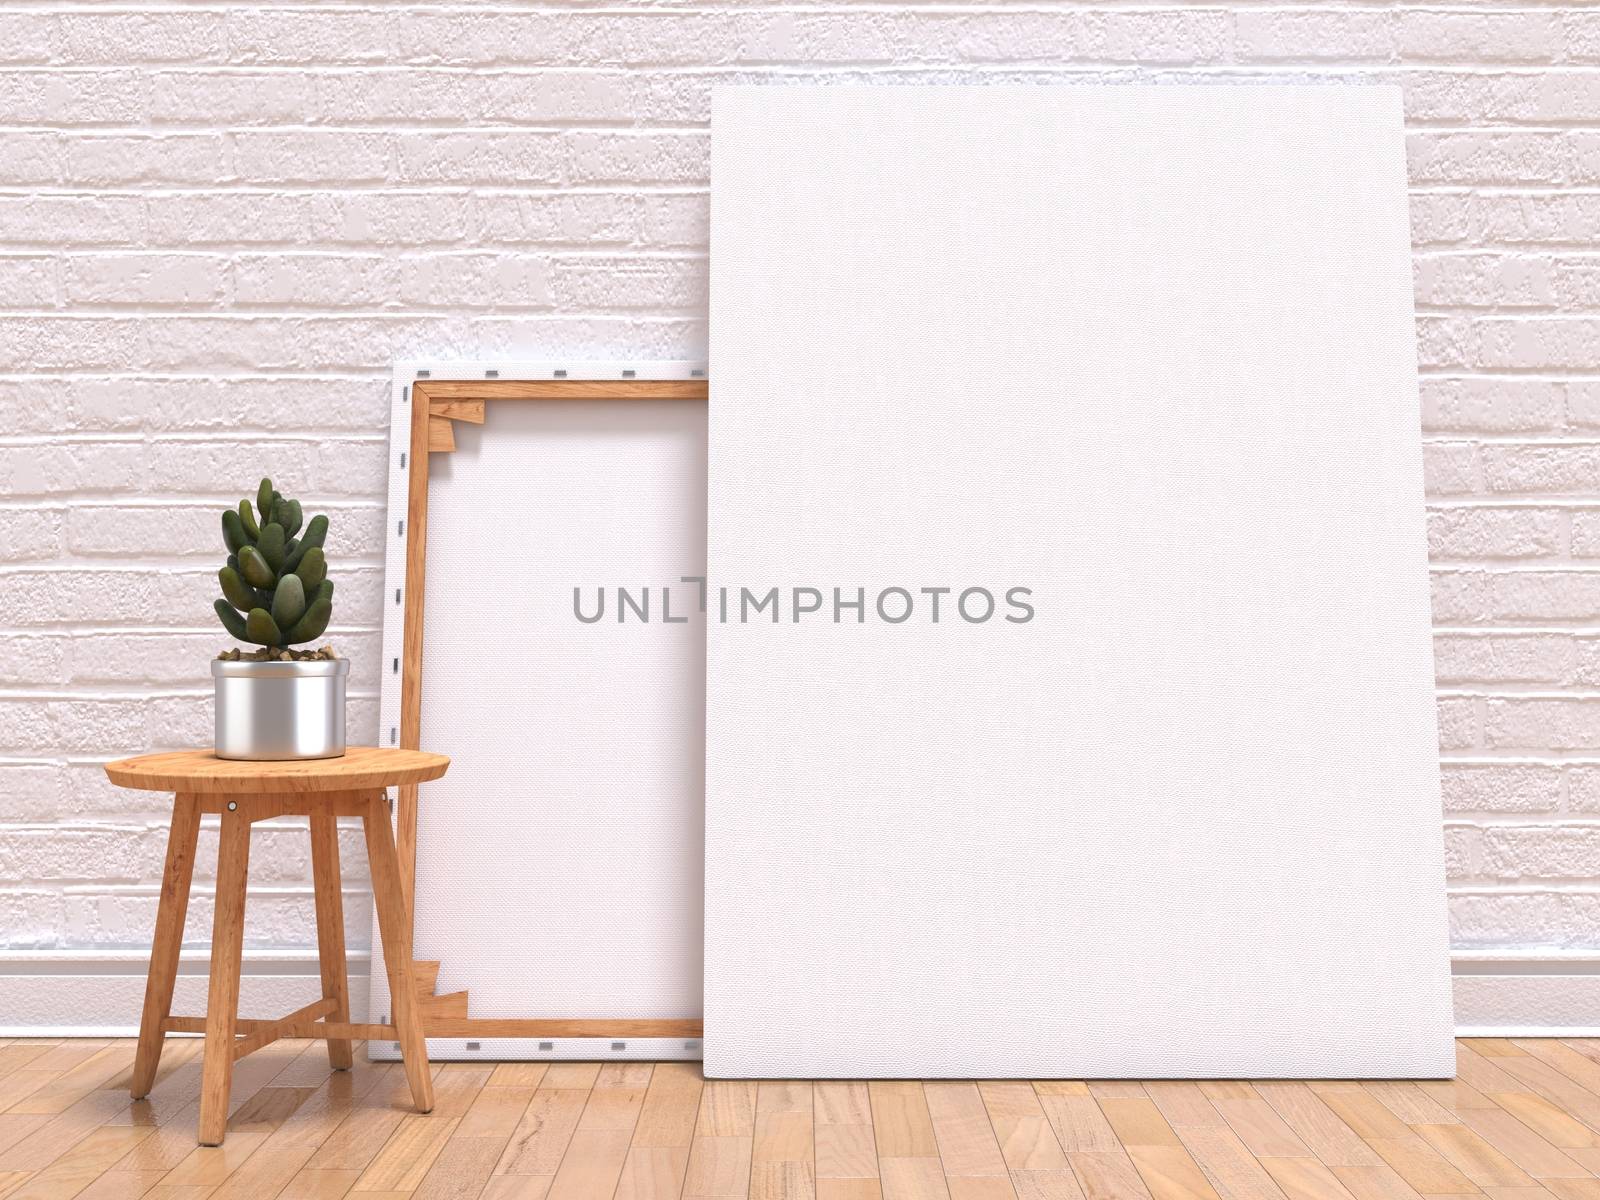 Mock up canvas frame with plant, floor and wall. 3D render illustration